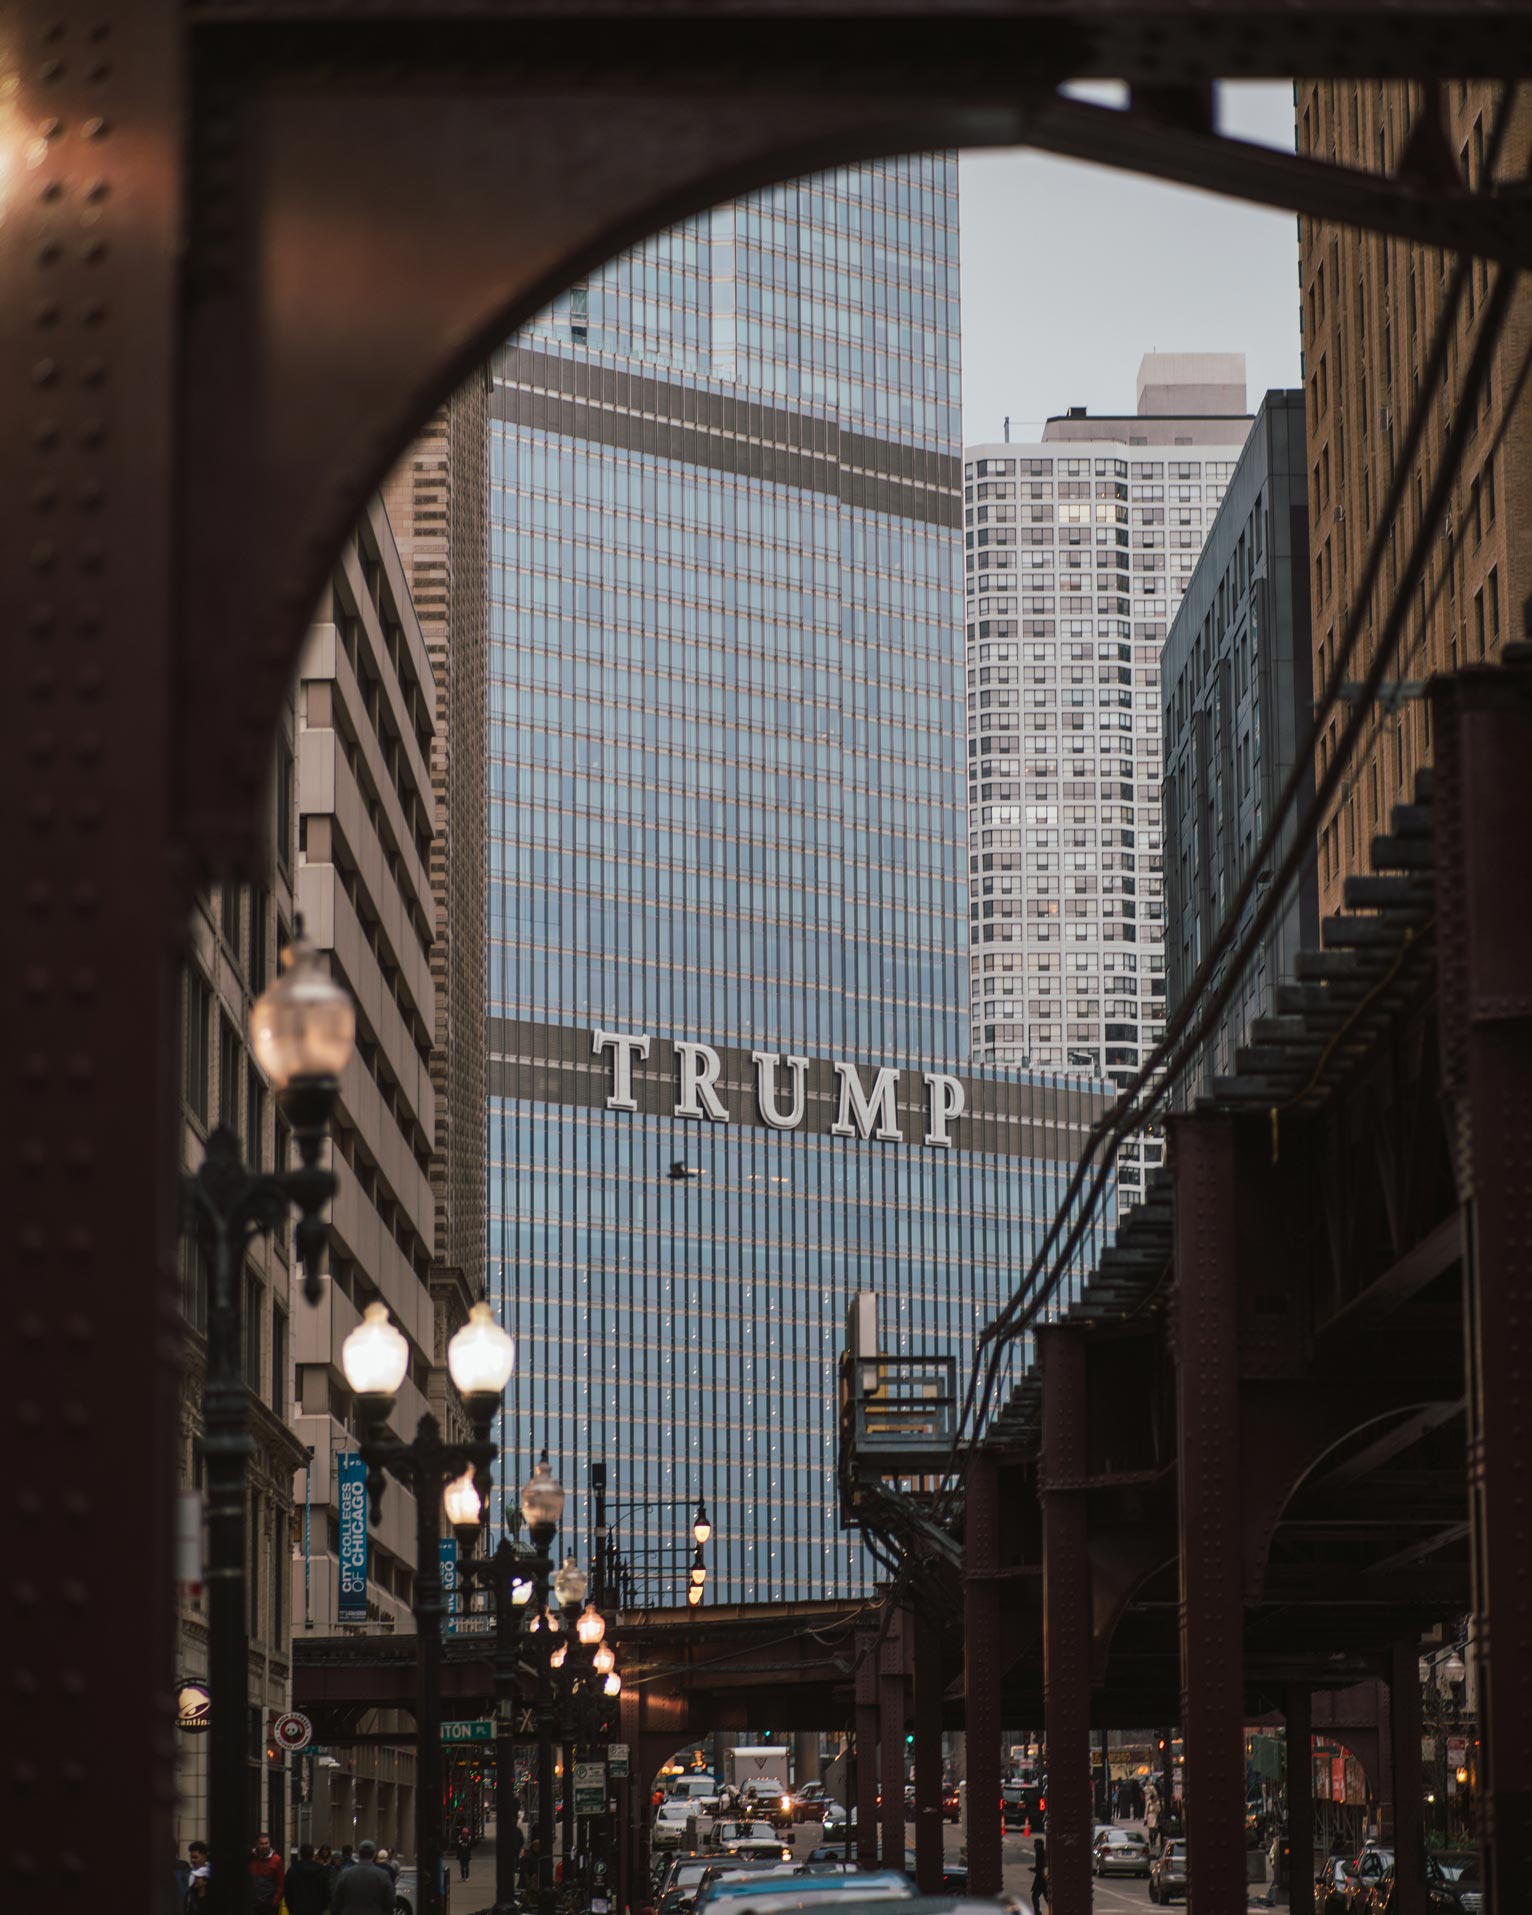 In a re-election bid, will Donald Trump use the state for a revenge campaign? Trump Tower in Chicago, USA. Image via Vince Fleming / unsplash.